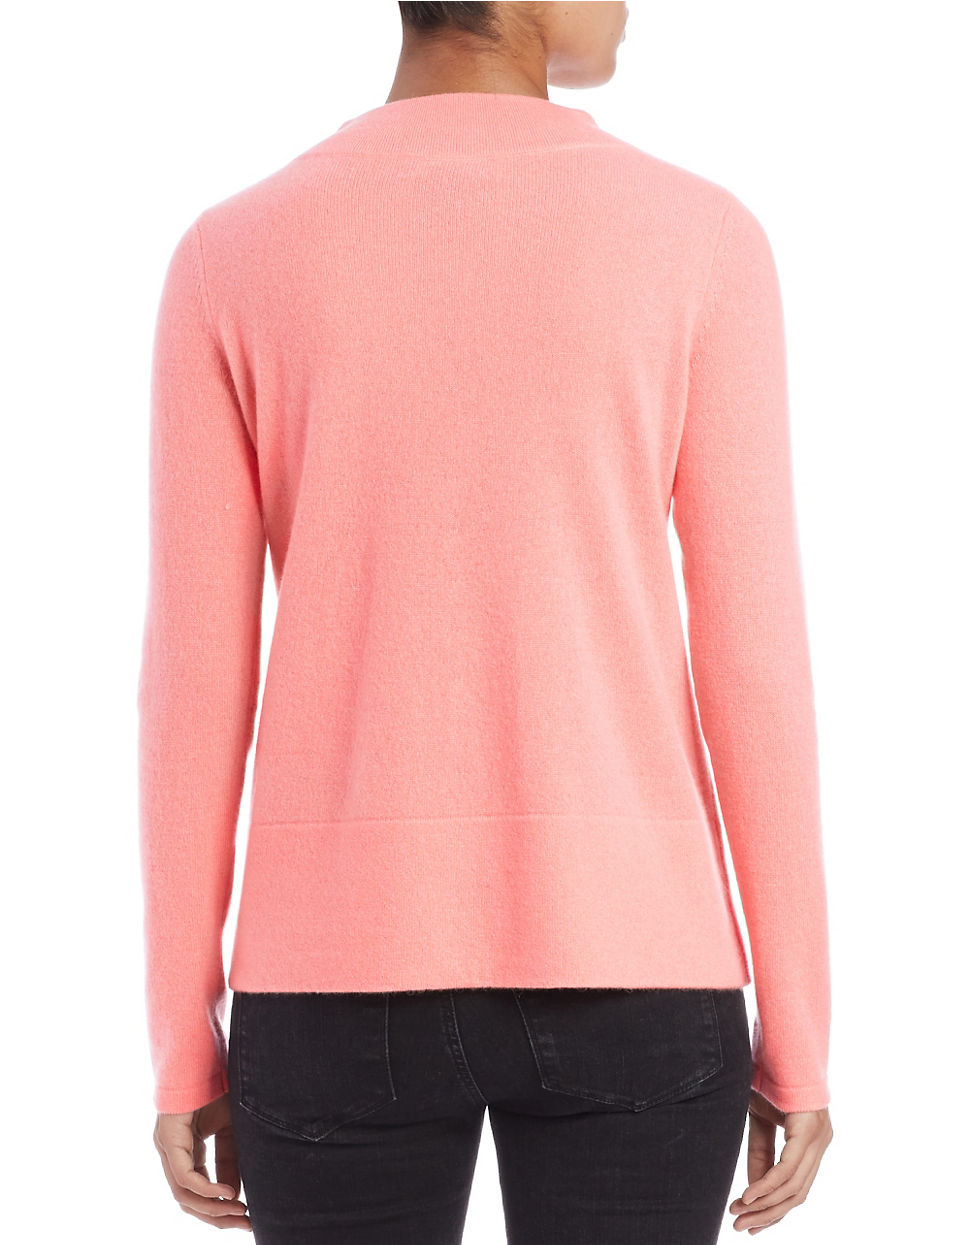 Lyst - Lord & Taylor Boat-neck Cashmere Sweater in Pink